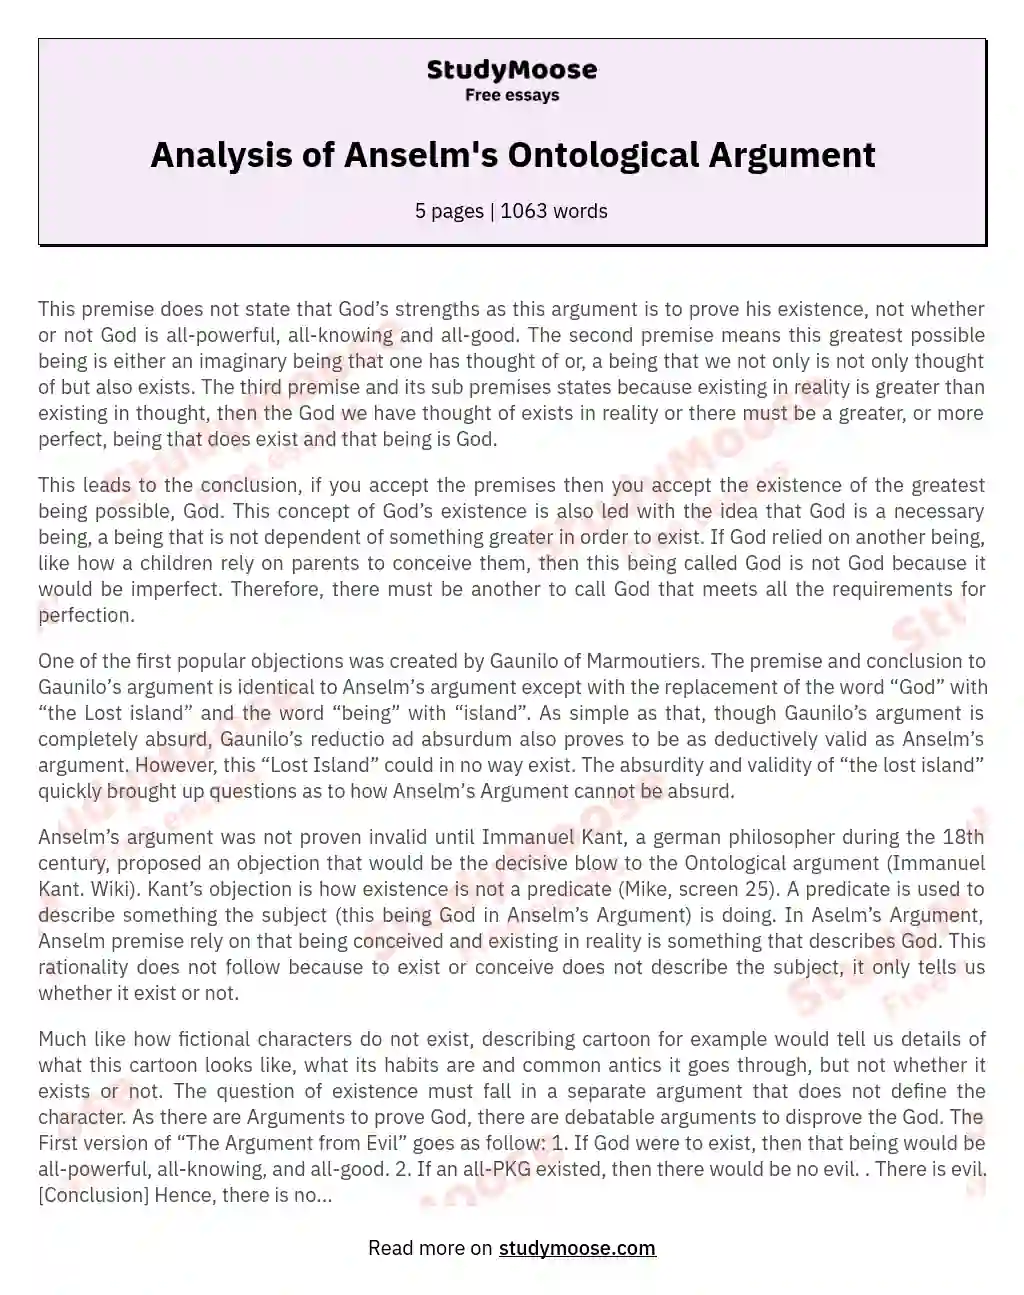 Analysis of Anselm's Ontological Argument